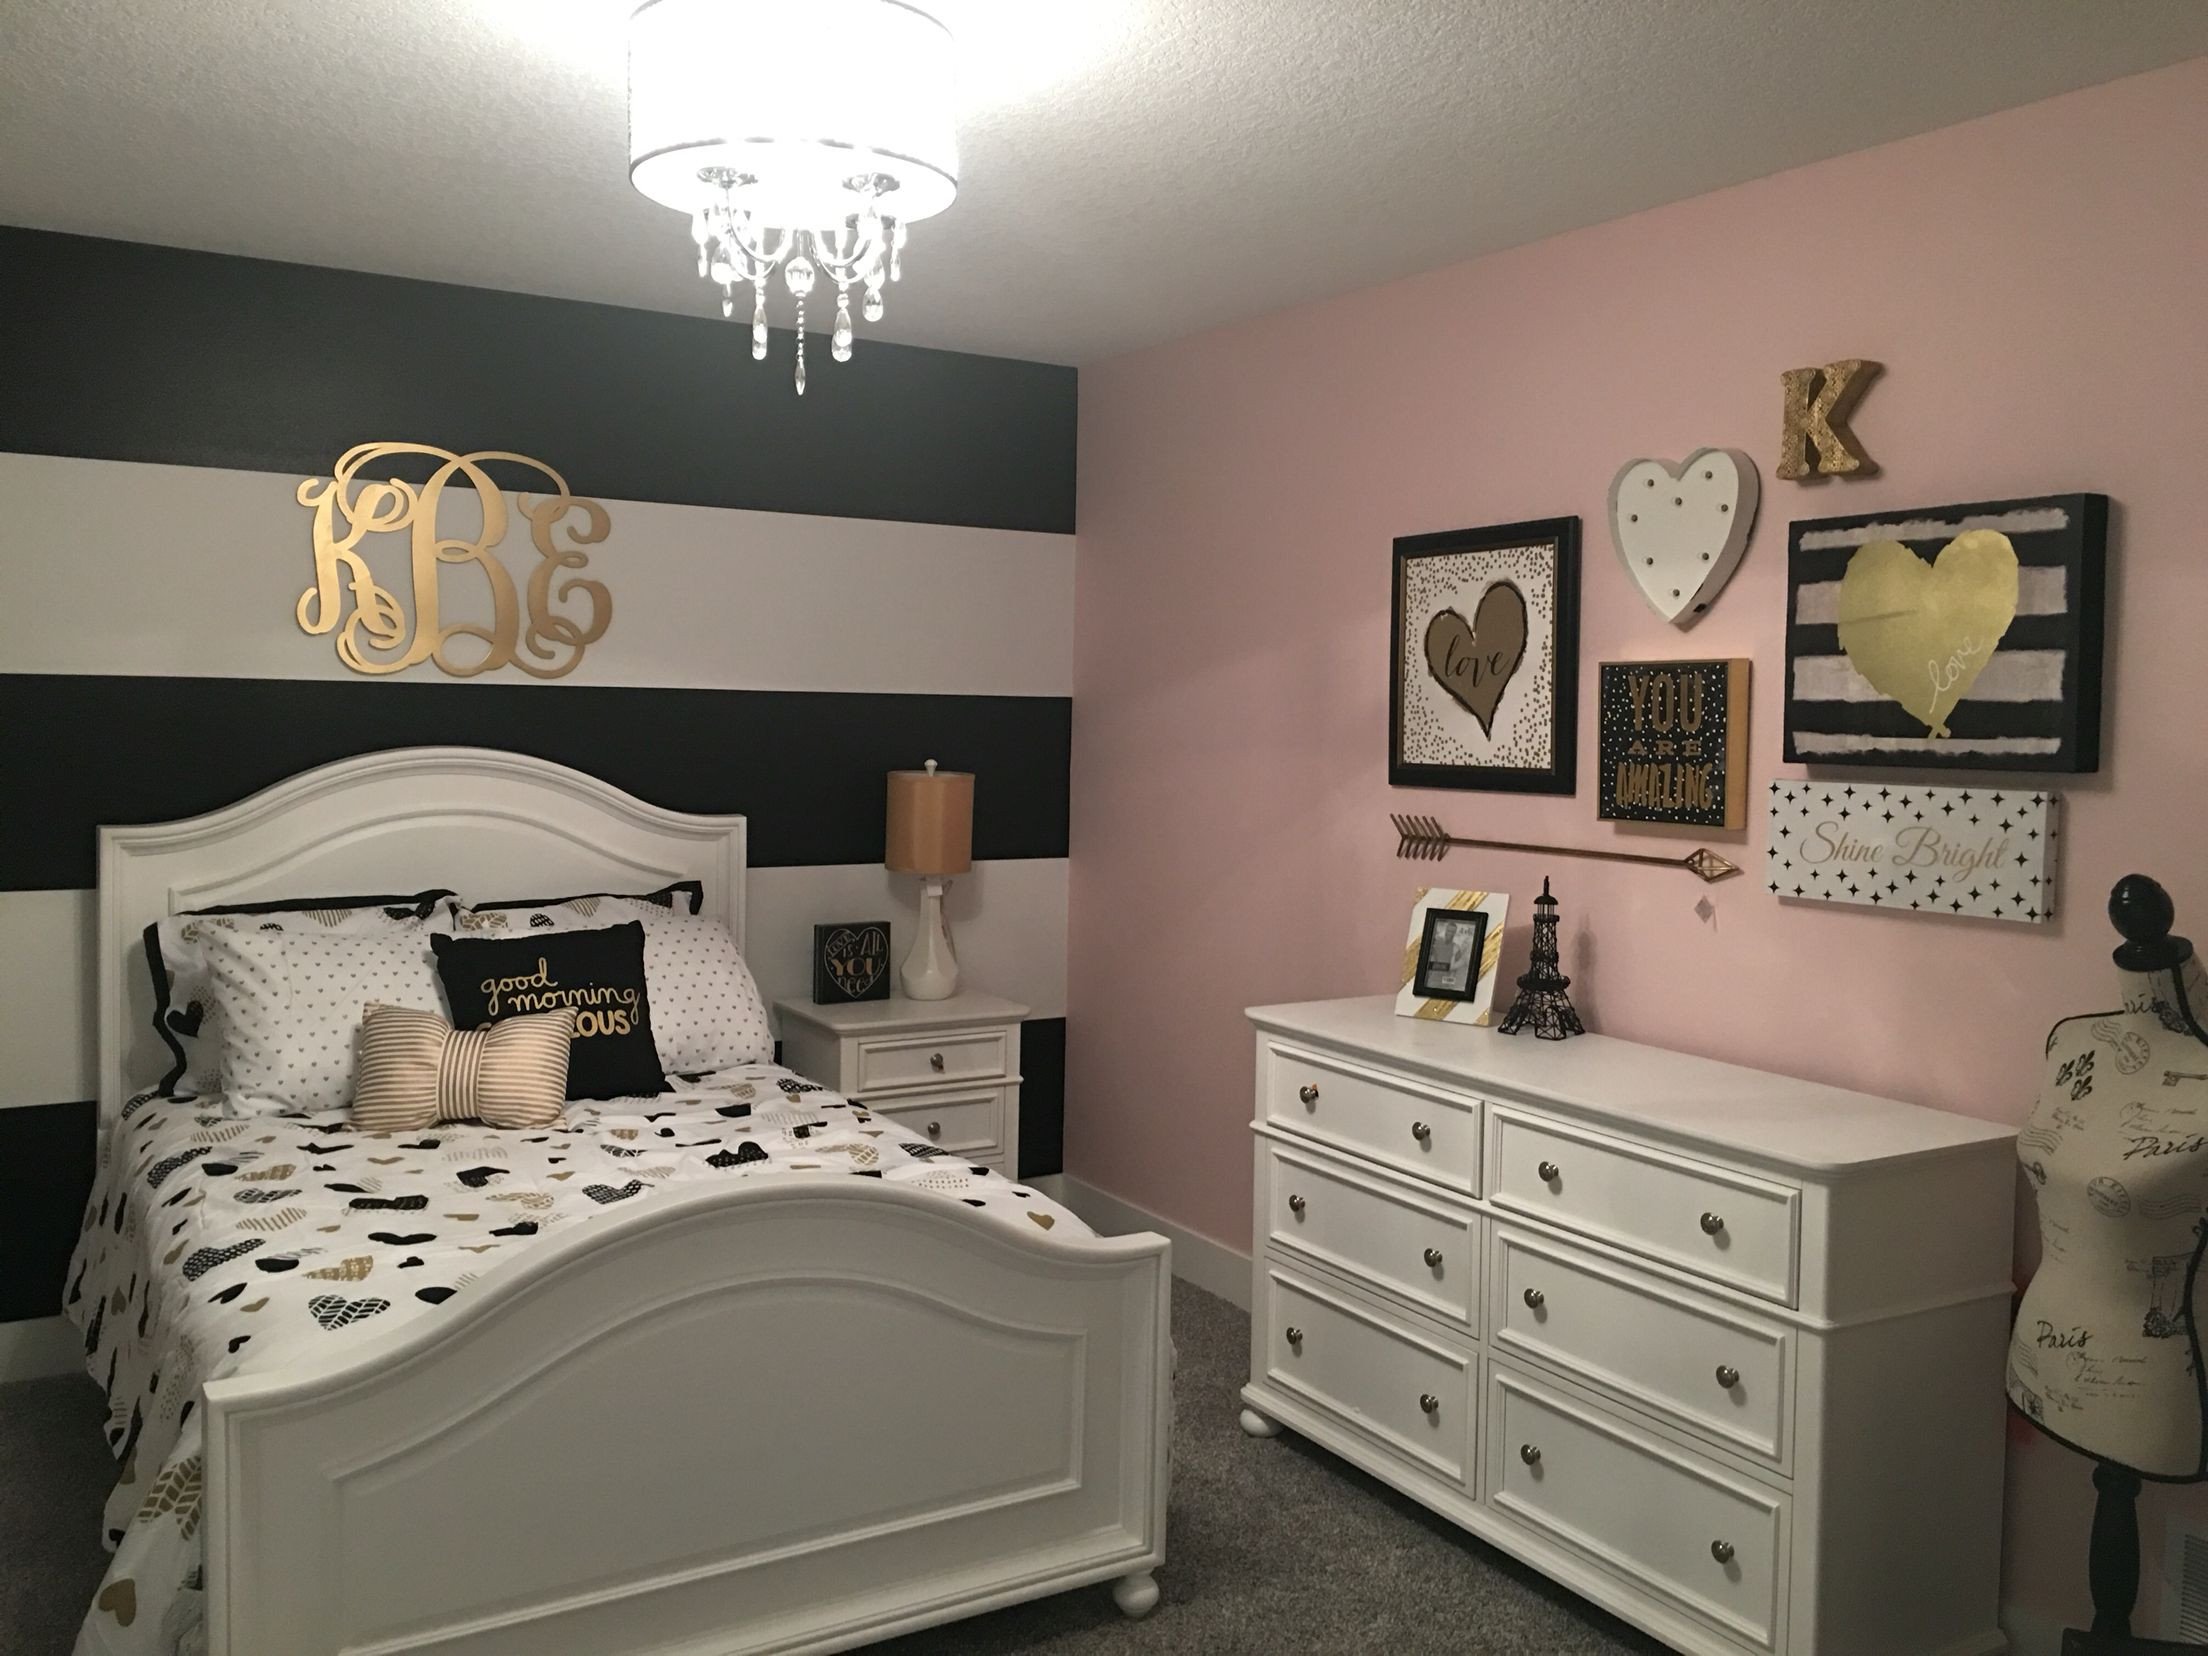 Black and Gold Bedroom Decor New I Love the Way This Black and Gold Room Turned Out the Best Thing About This Room Was It Was